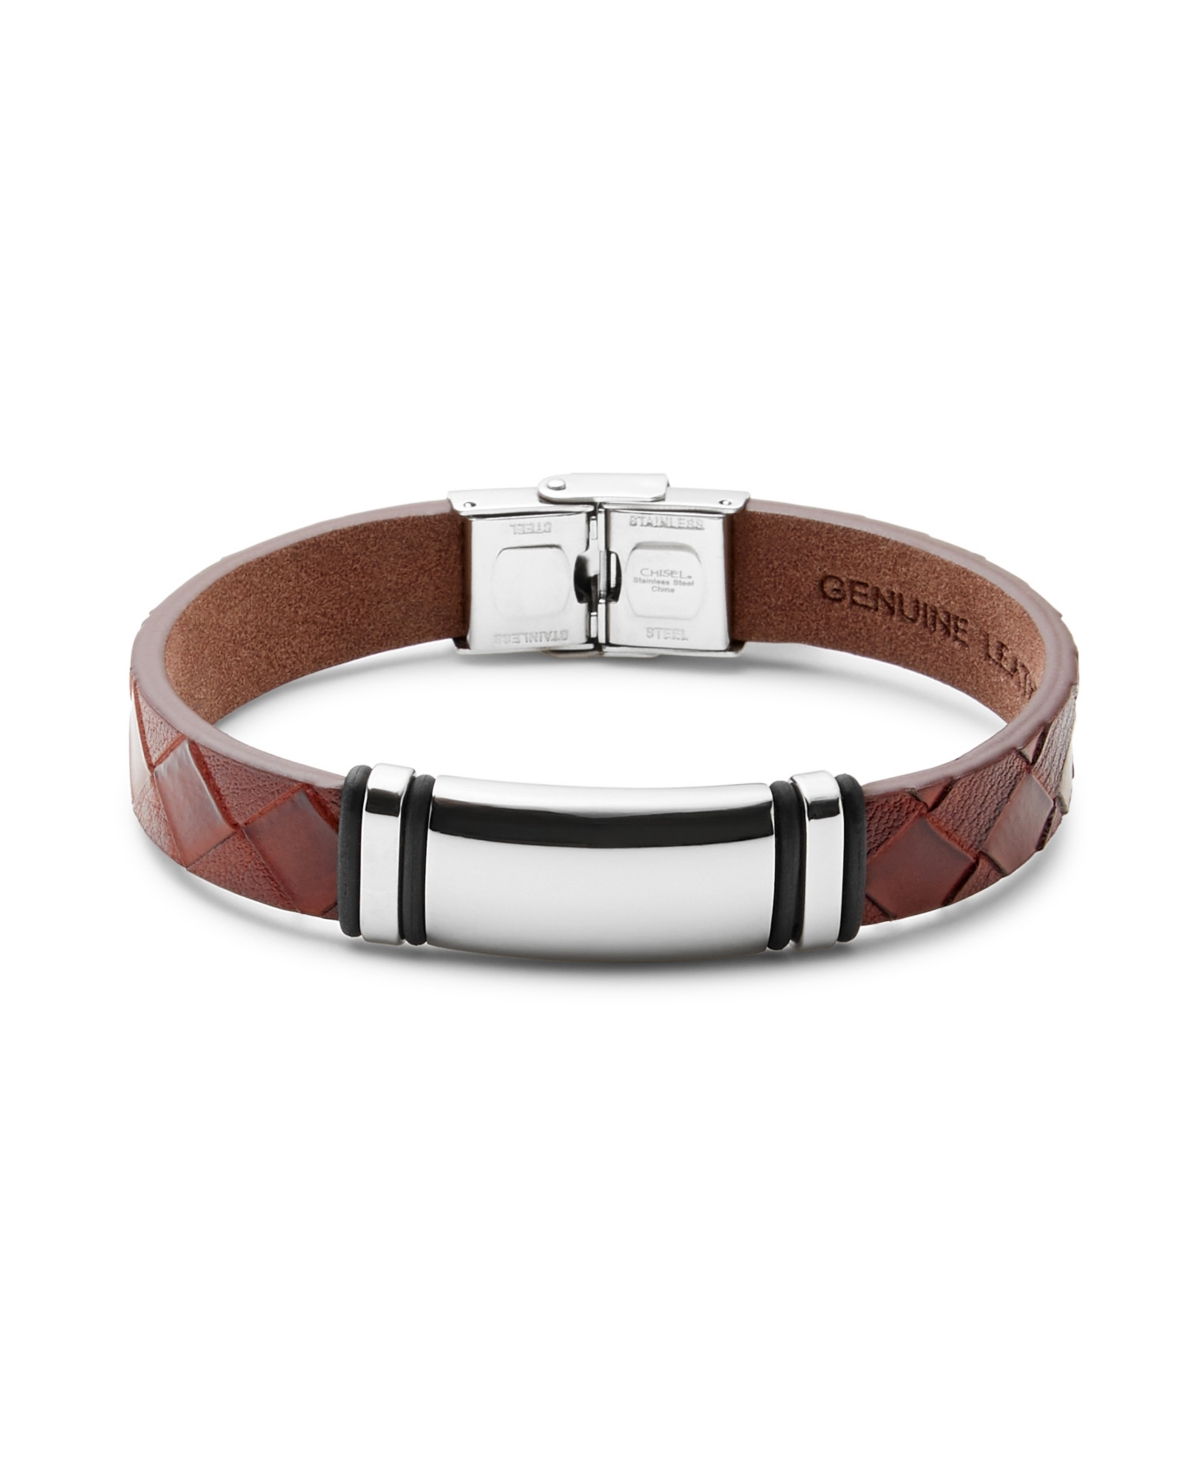 Eve's Jewelry Men's Brown Woven Leather Id Bracelet